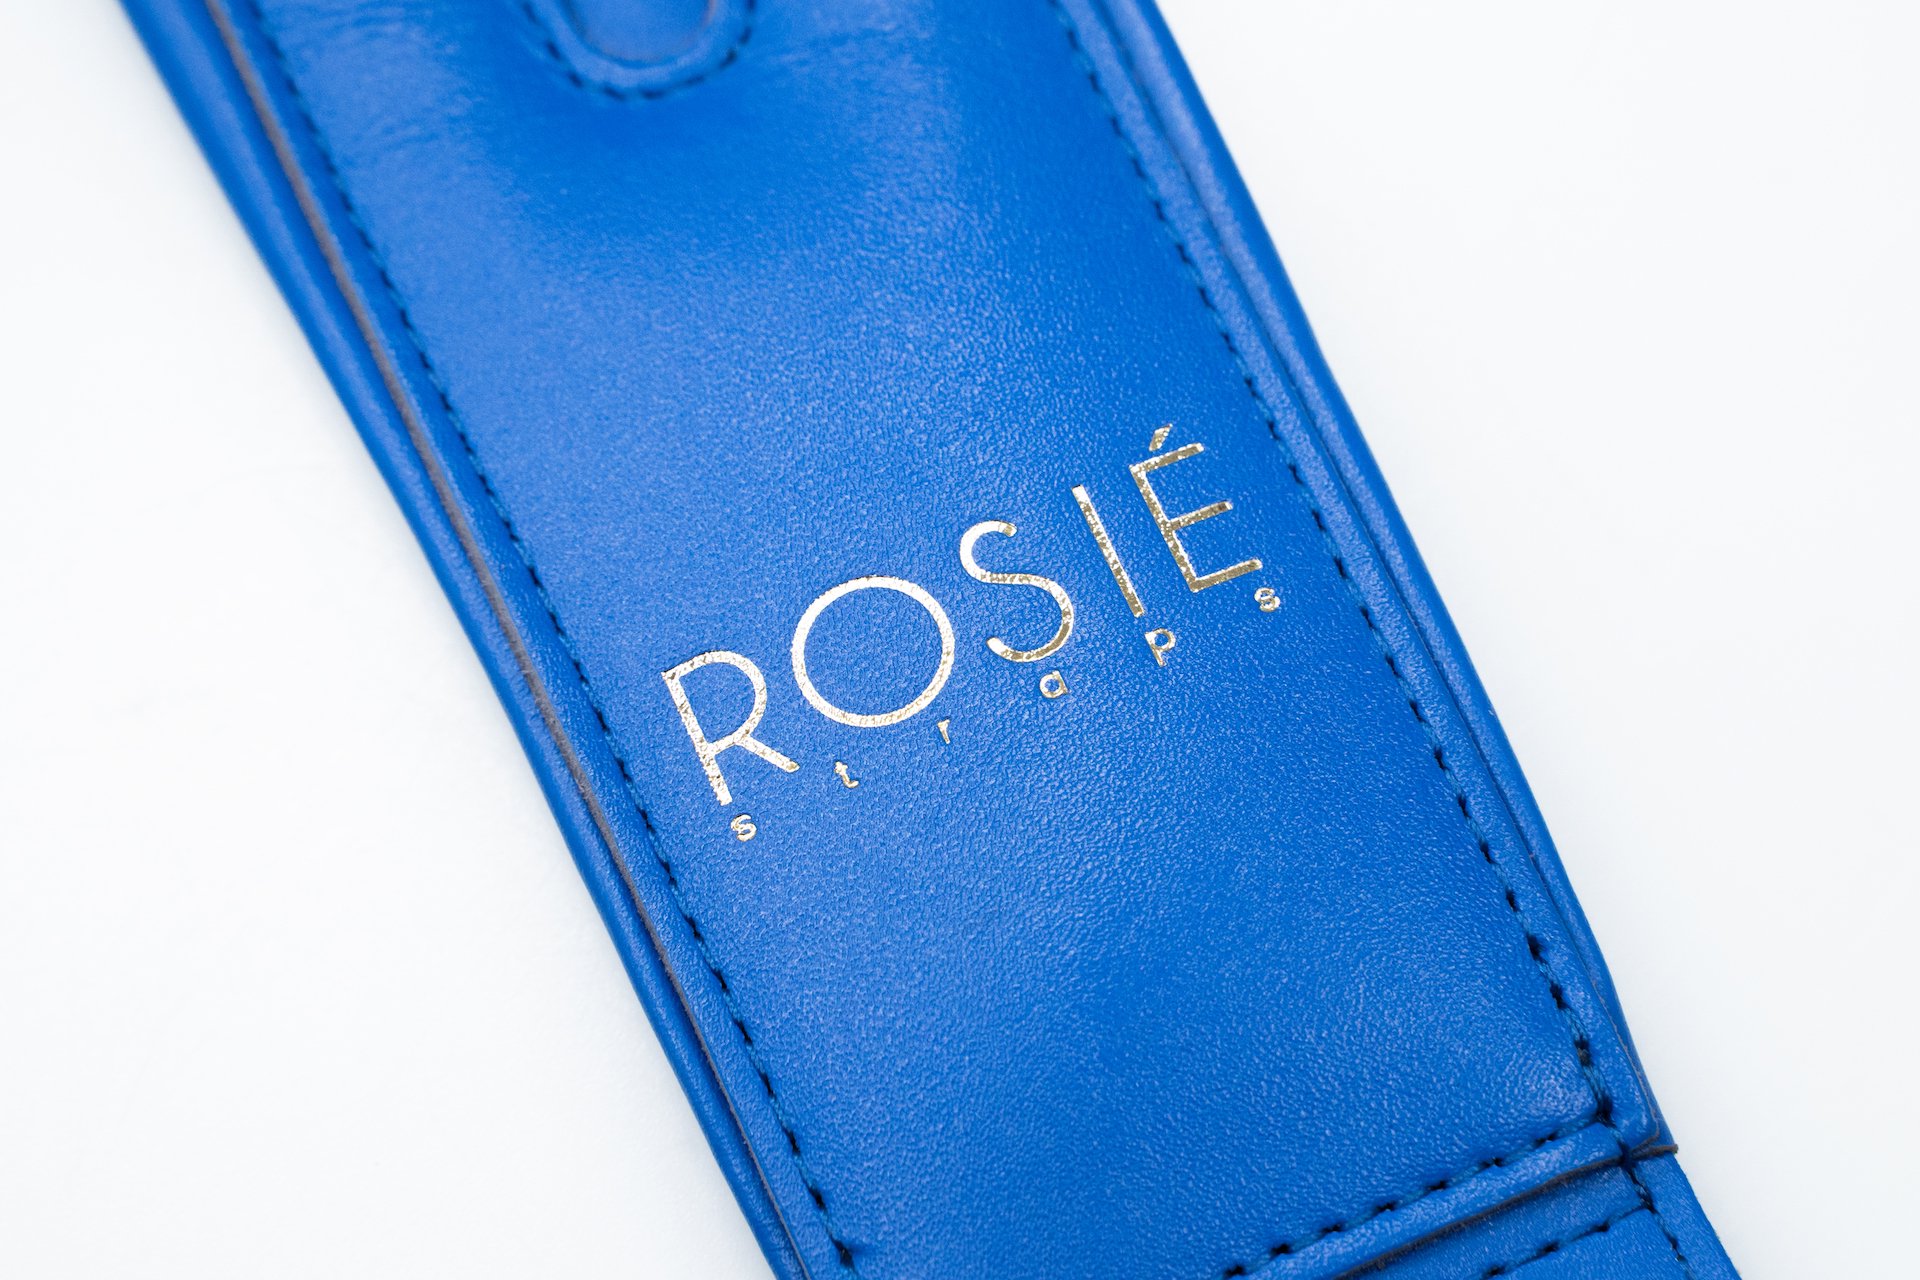 new】ROSIÉ / ROSIE straps Pastel Limited Collection Blue 2.5inch【横浜店】 - Geek  IN Box